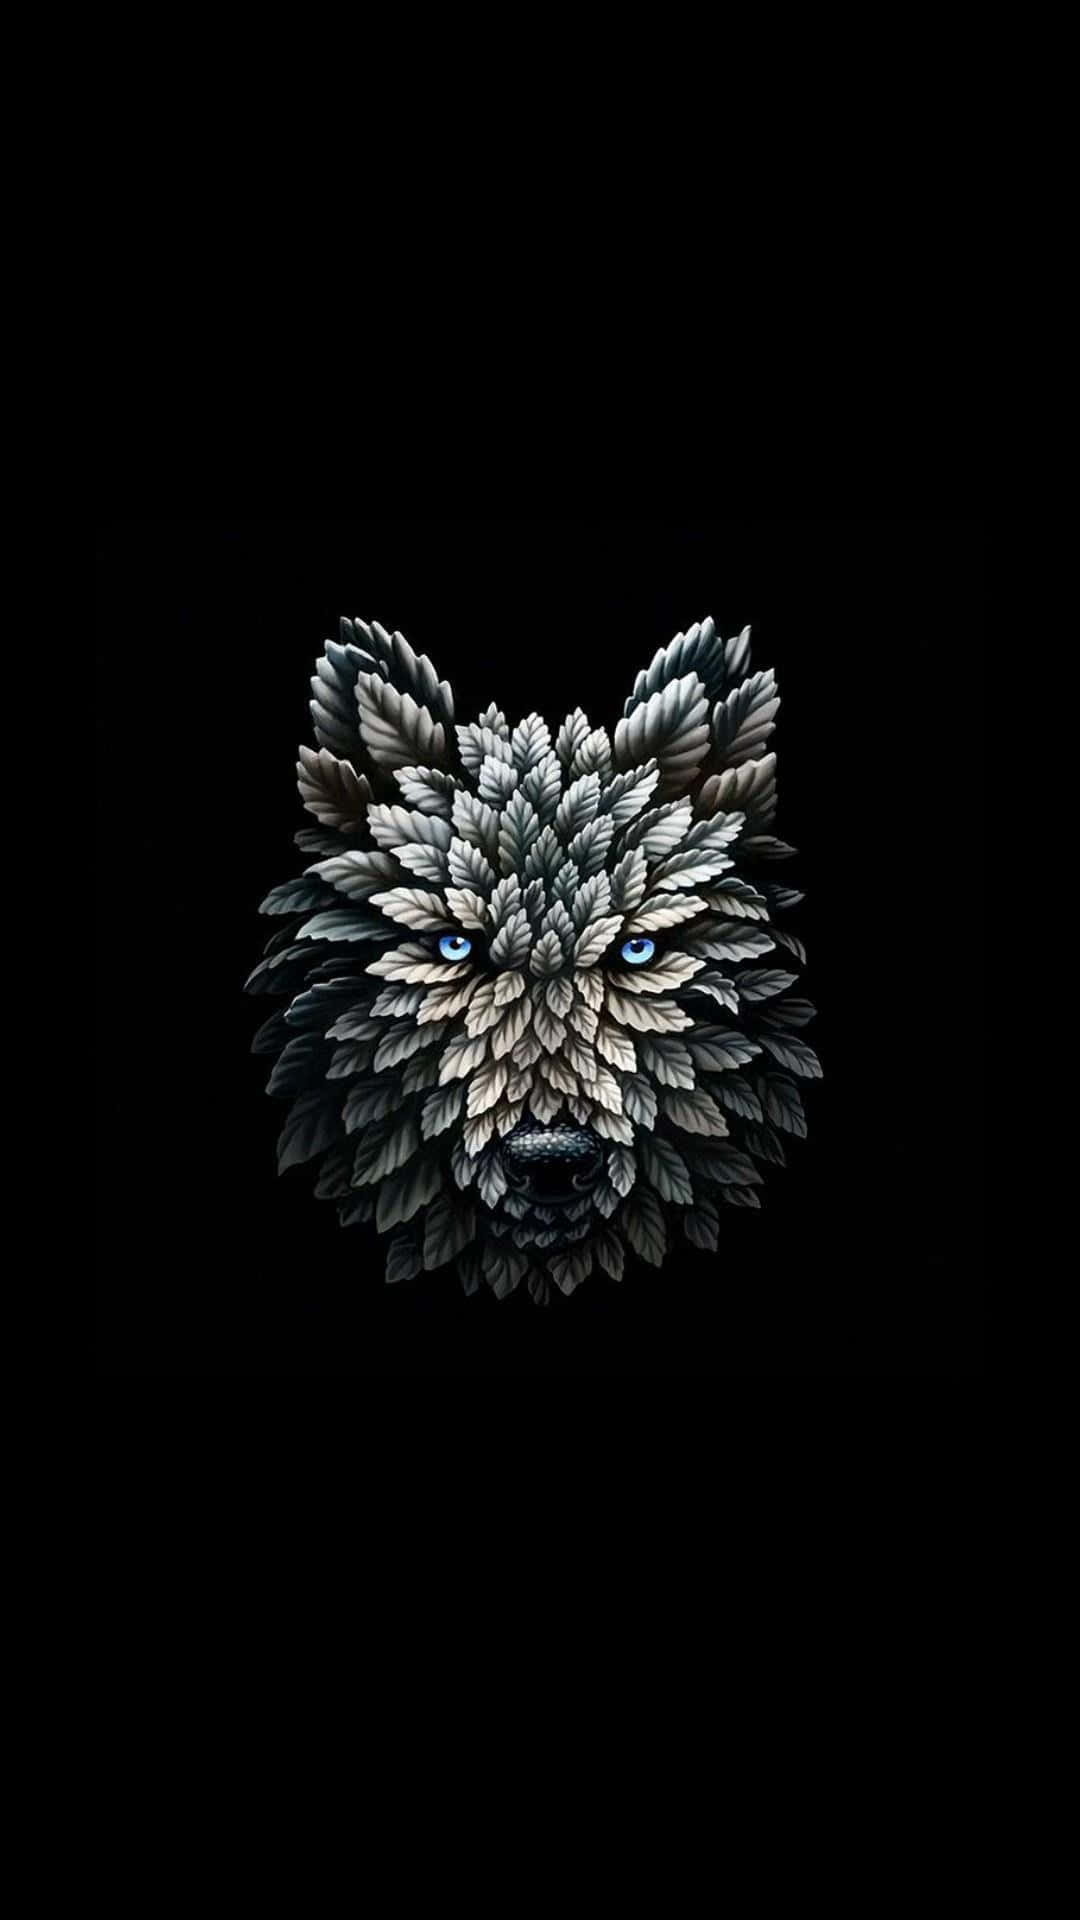 A Wolf Head With Blue Eyes On A Black Background Wallpaper